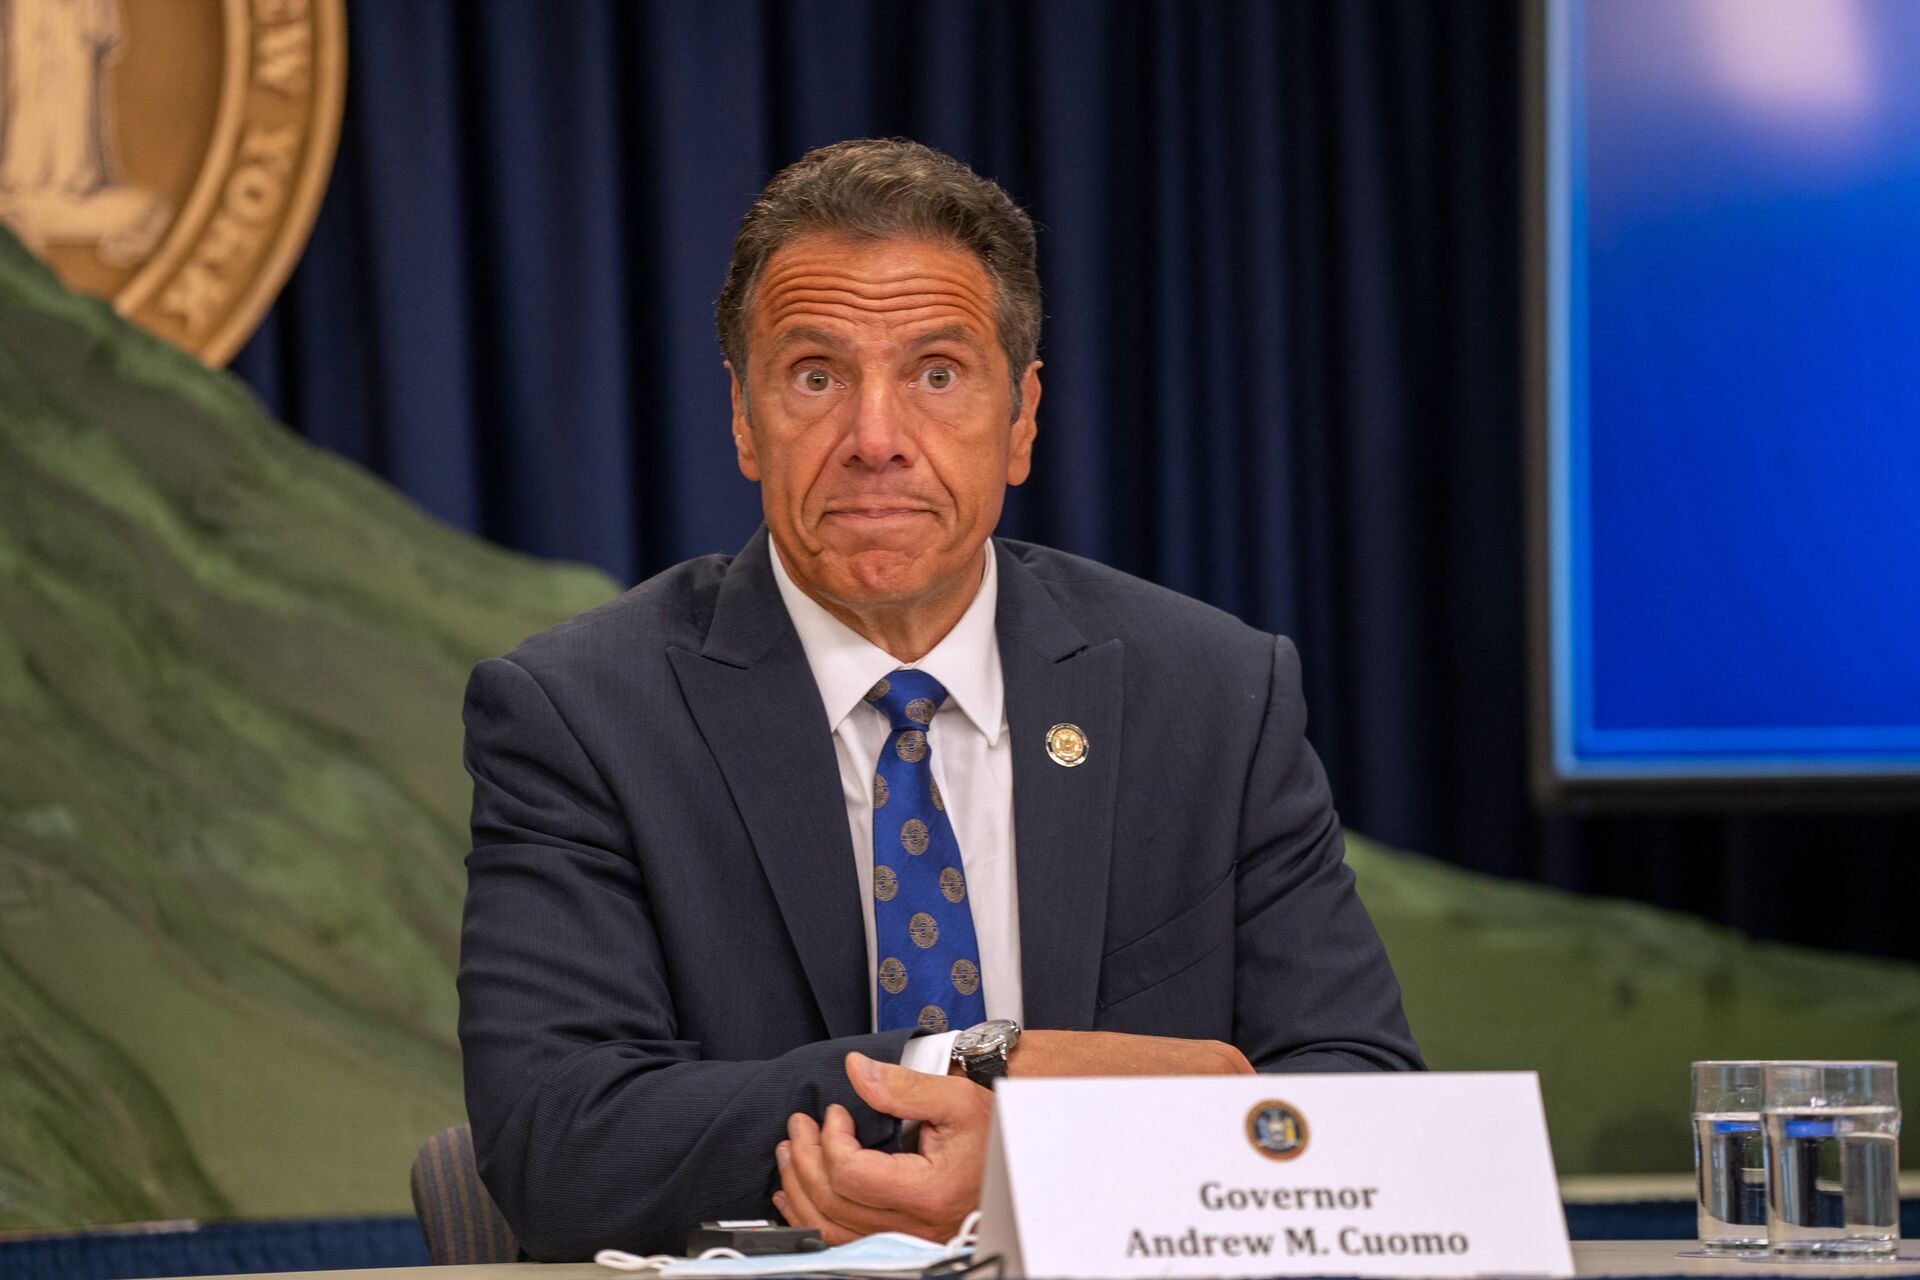 New York Governor Andrew Cuomo speaks during a COVID-19 briefing on July 6, 2020 in New York City. On the 128th day since the first confirmed case in New York and on the first day of phase 3 of the reopening, Gov. Cuomo asked New Yorkers to continue to be smart while citing the rise of infections in other states. - Sputnik International, 1920, 07.09.2021